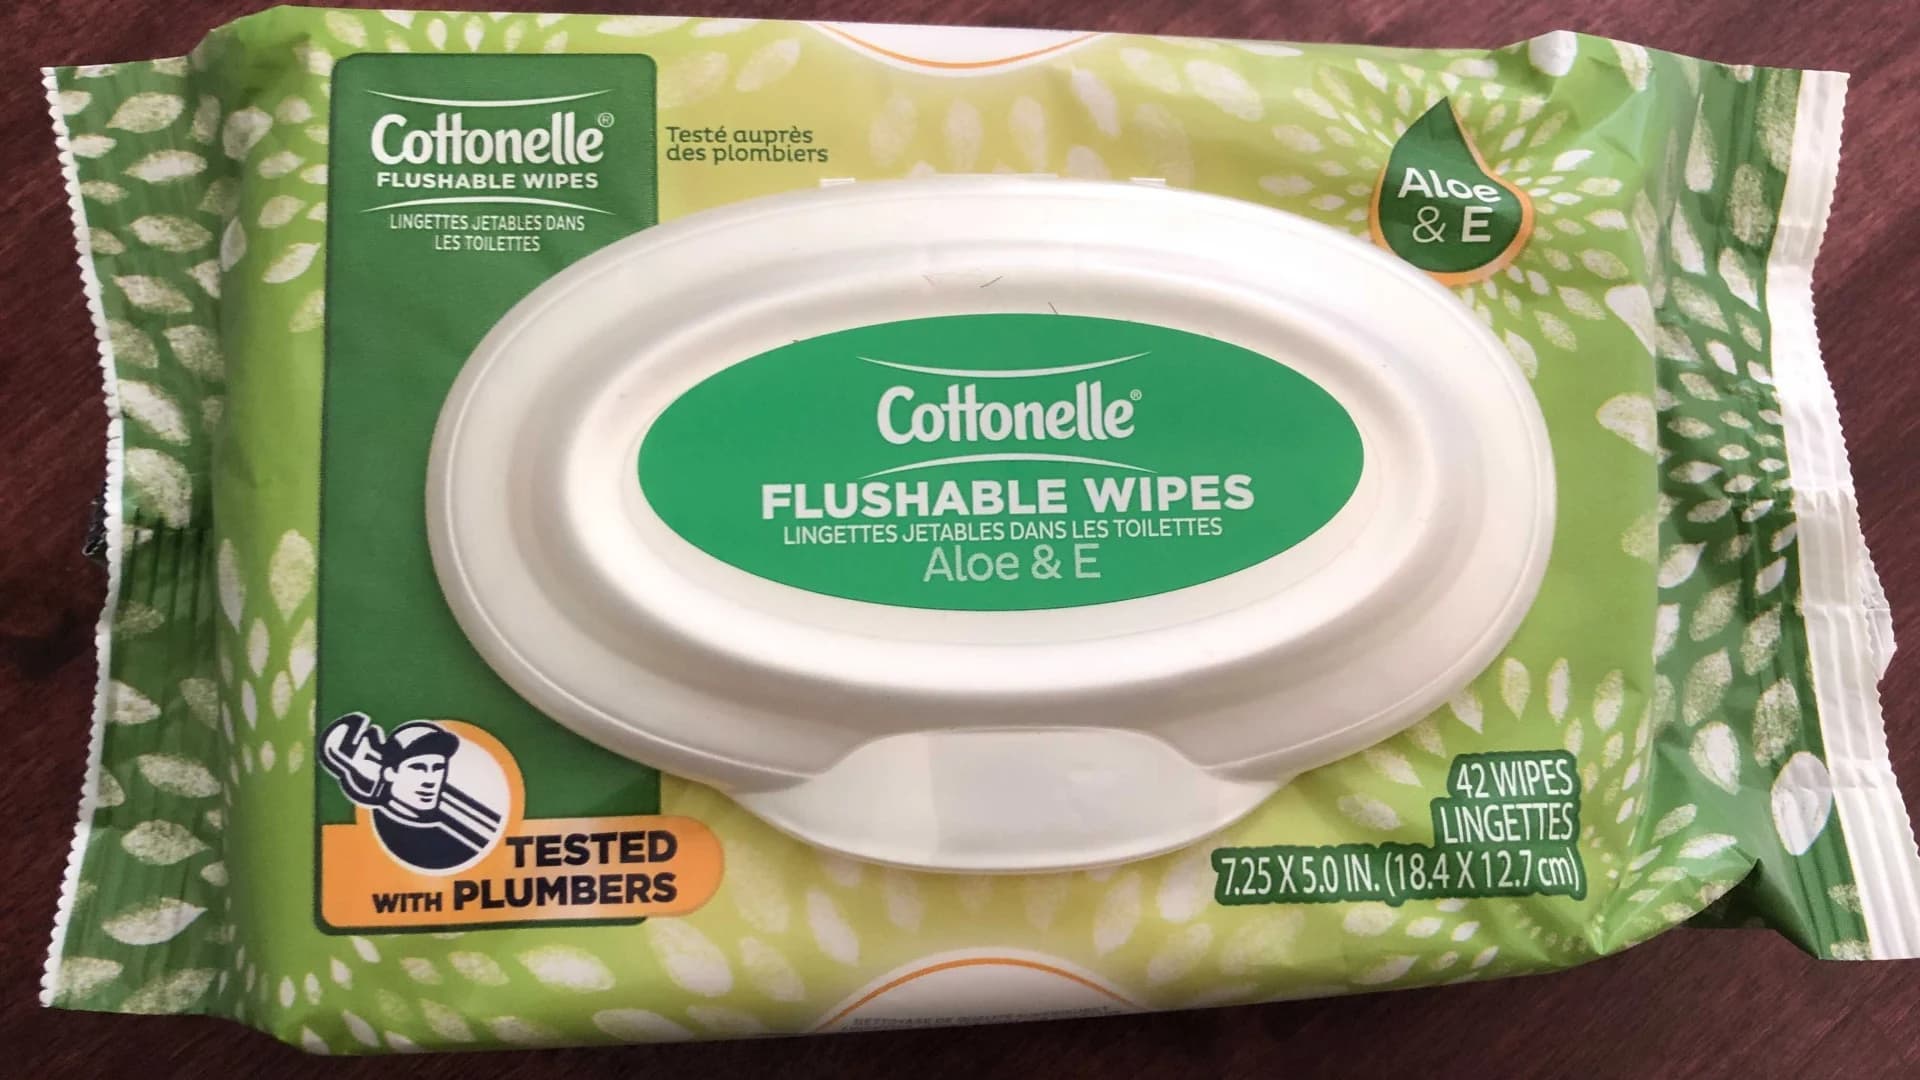 Kimberly-Clark announces Cottonelle wipe recall due to bacteria concerns